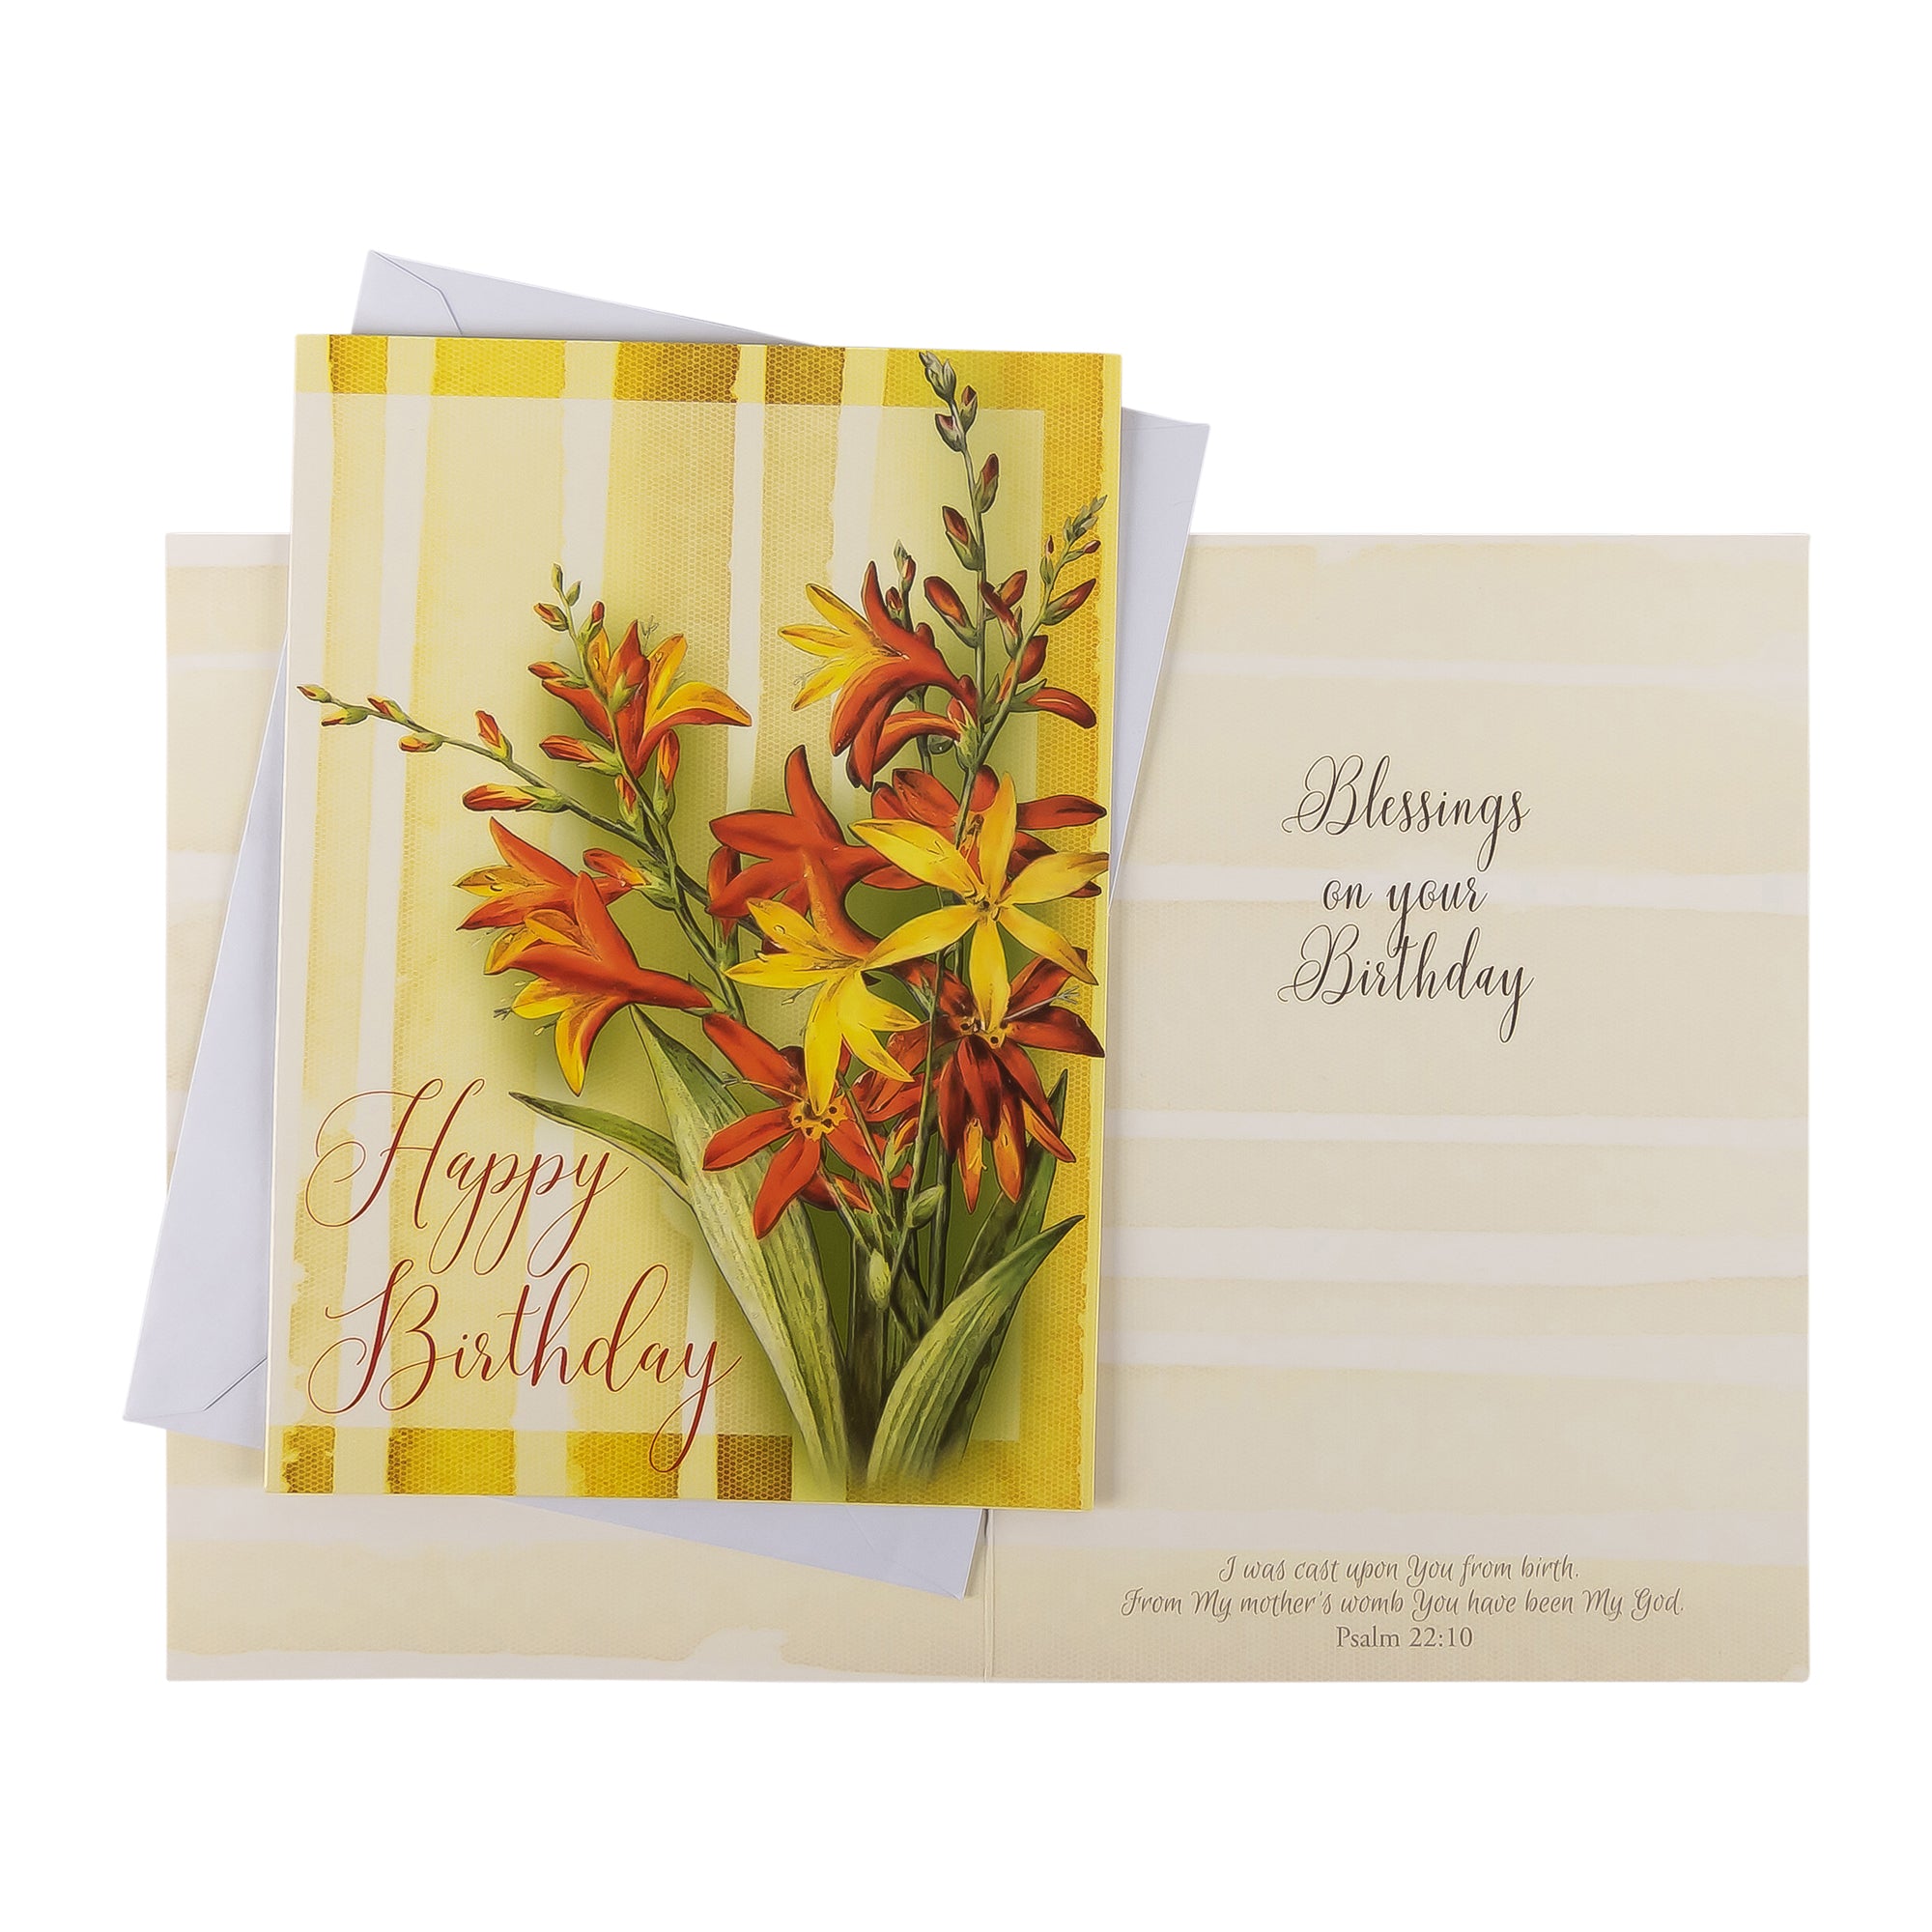 Boxed Cards: Happy Birthday Floral Assortment